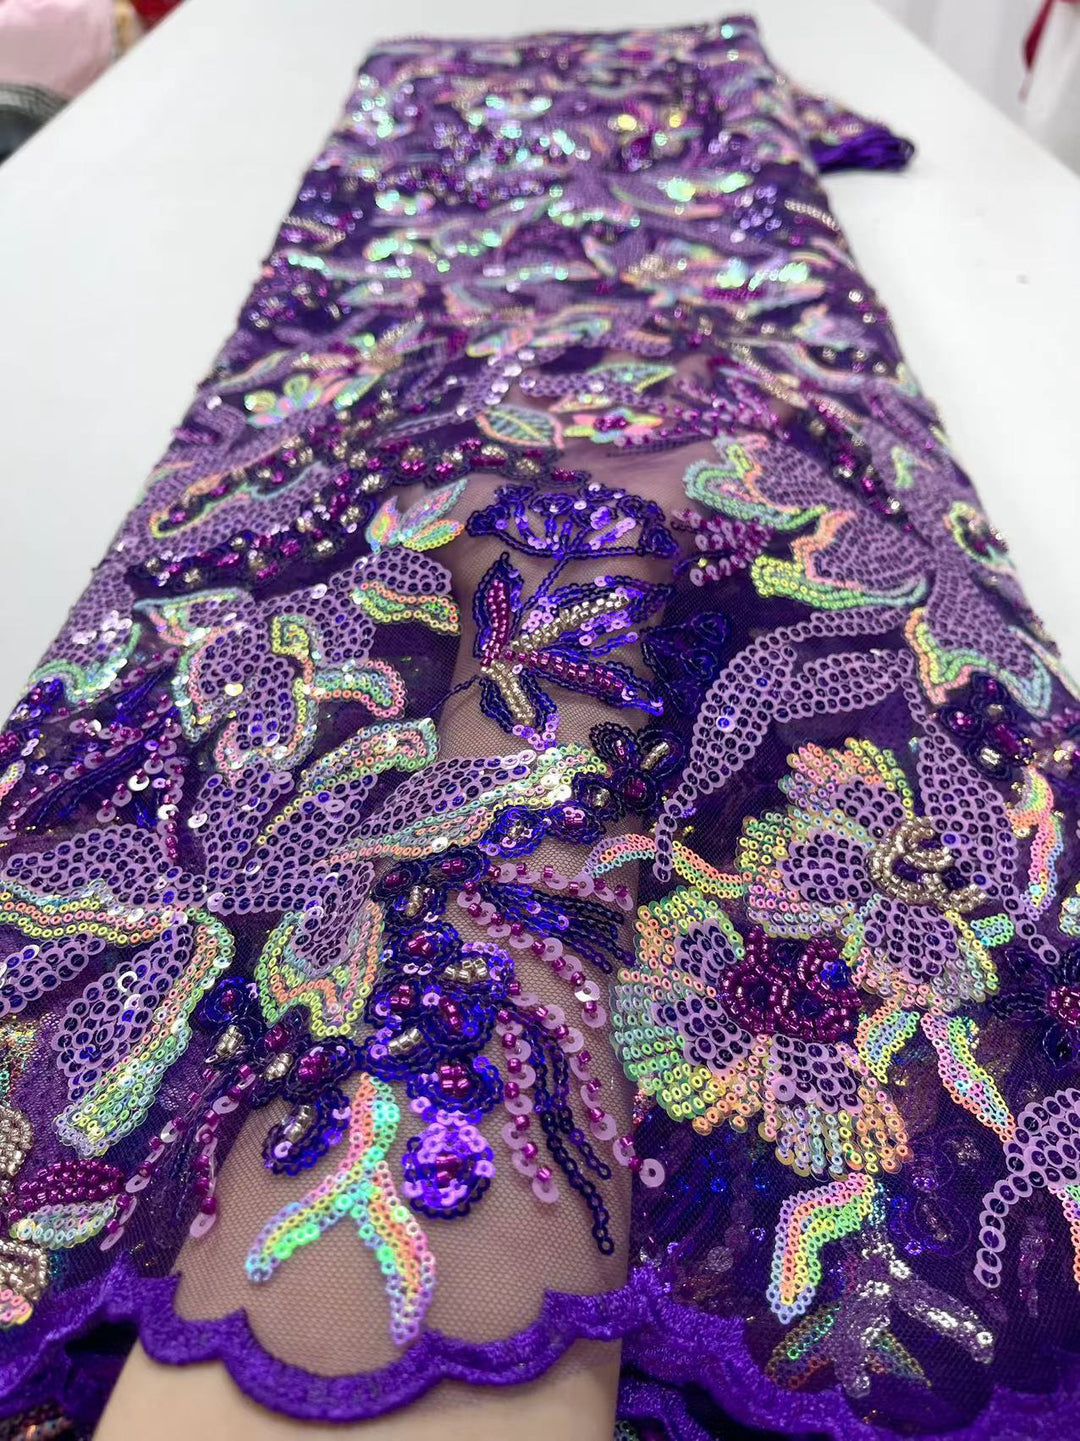 5 YARDS / 8 COLORS / Oscar Sequin Beaded Embroidery Glitter Mesh Sparkly Lace Wedding Party Dress Fabric